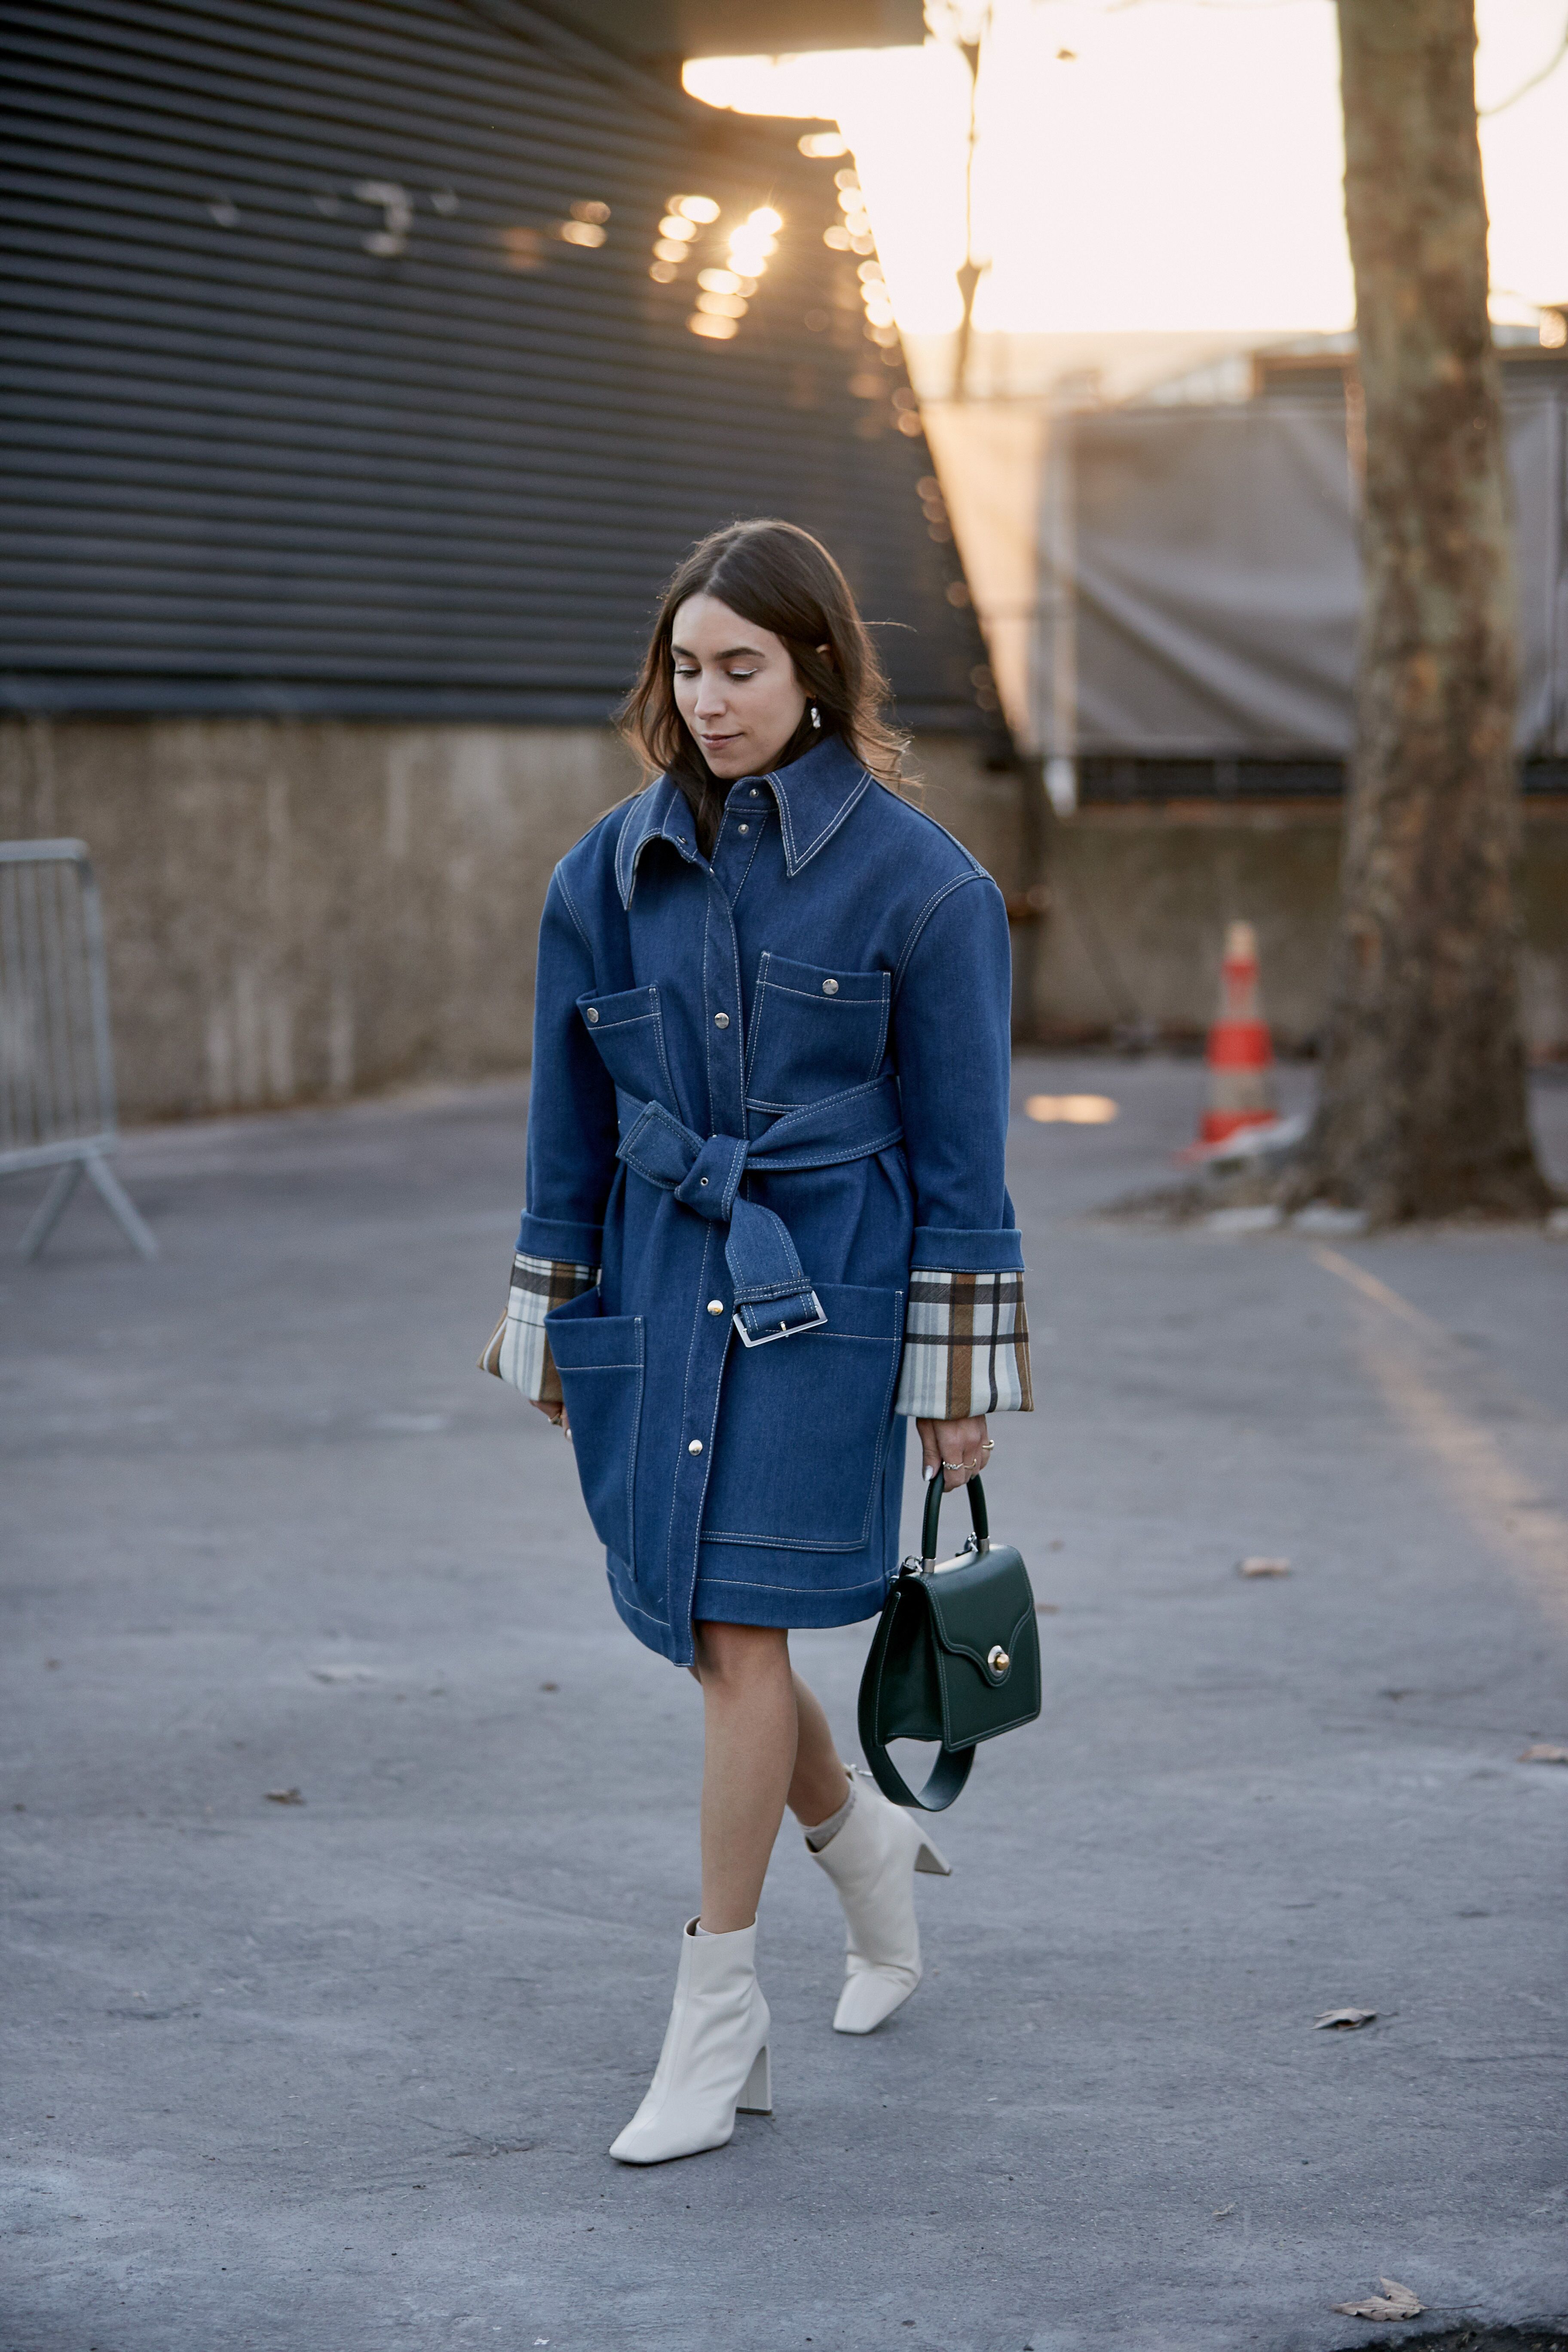 Here's How to Pair Jackets With Every Type of Dress | Who What Wear